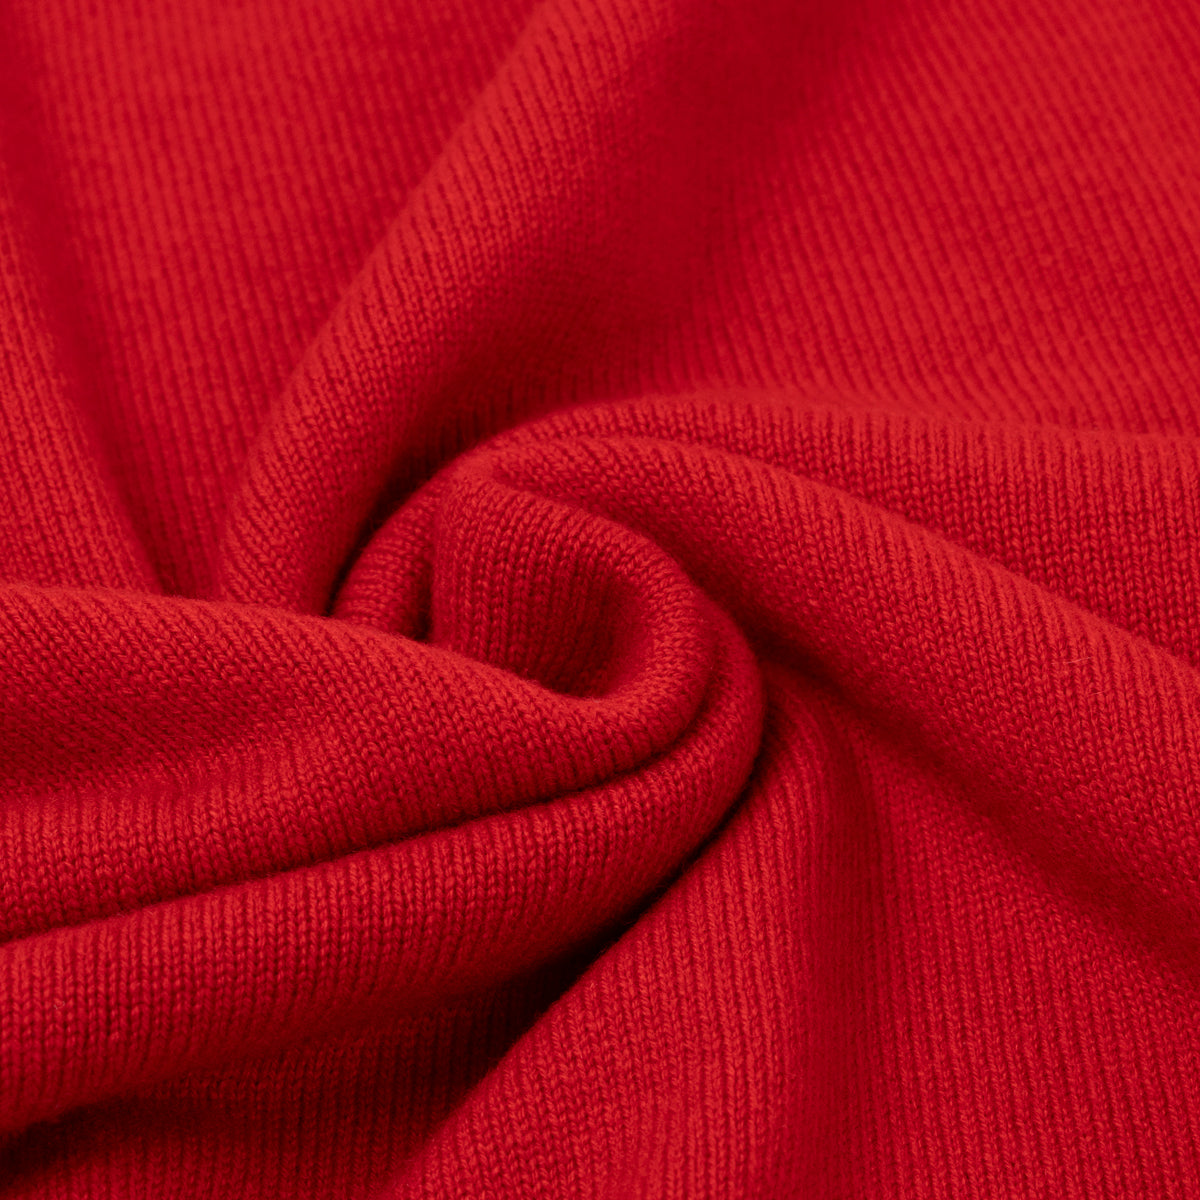 Ruby Red Tiree 4ply Crew Neck Cashmere Sweater  Robert Old   